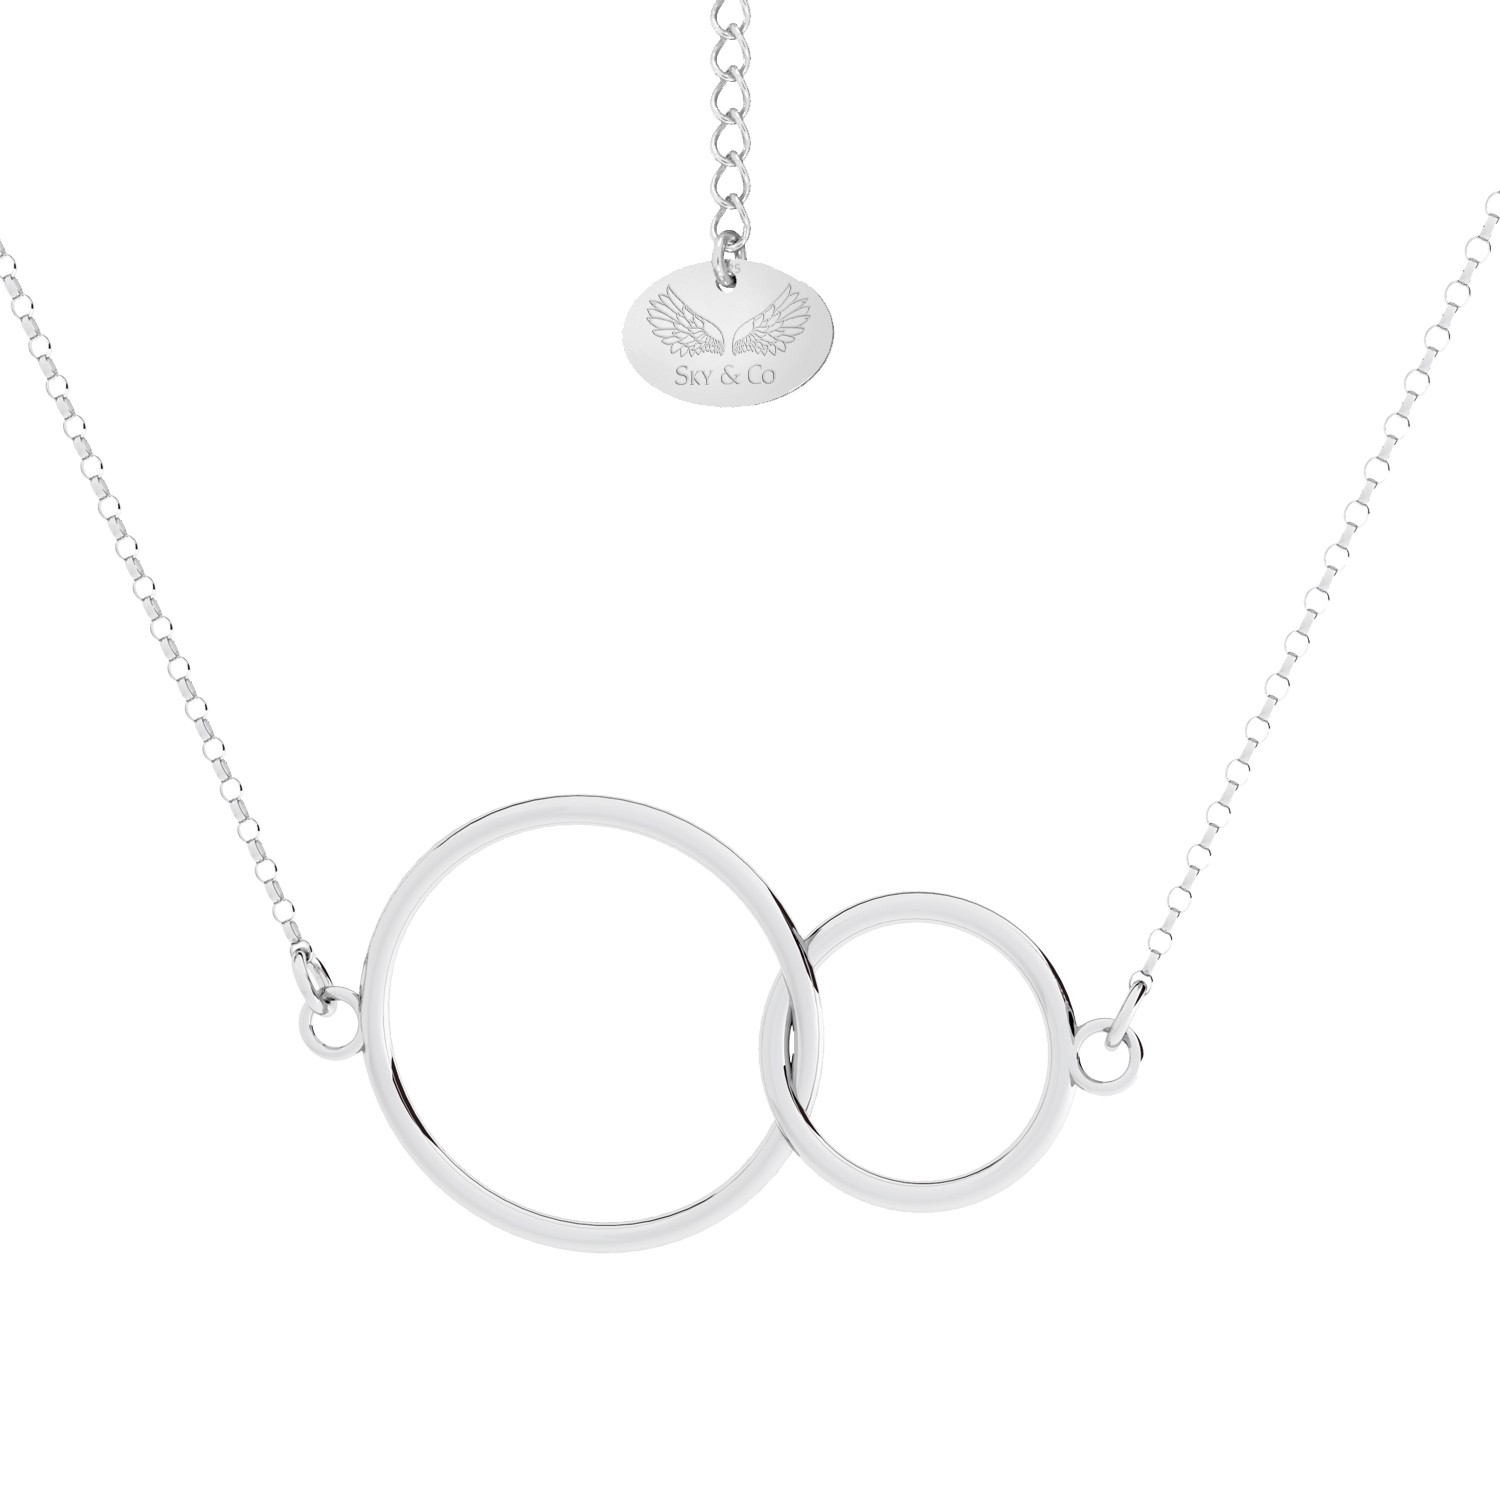 Double circle necklace, Oro, Sky&Soul, sterling silver 925